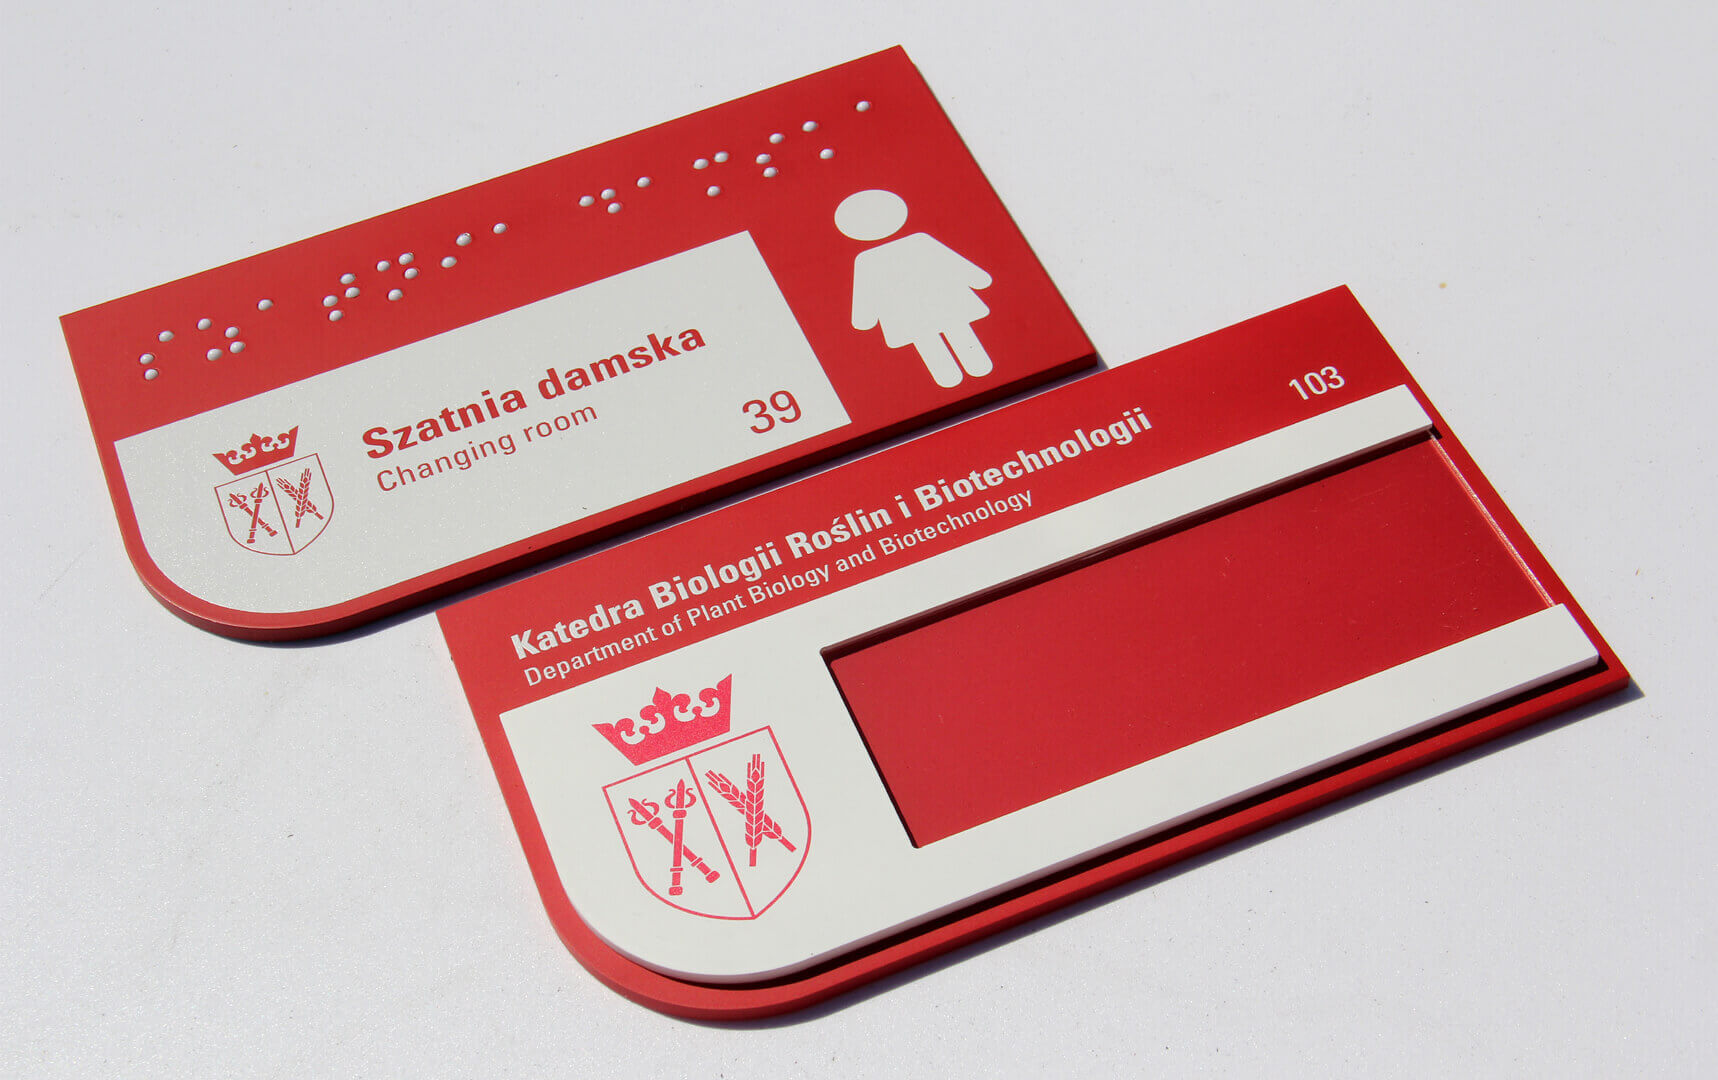 Information plate - Braille signage for the women's locker room, in white and red.